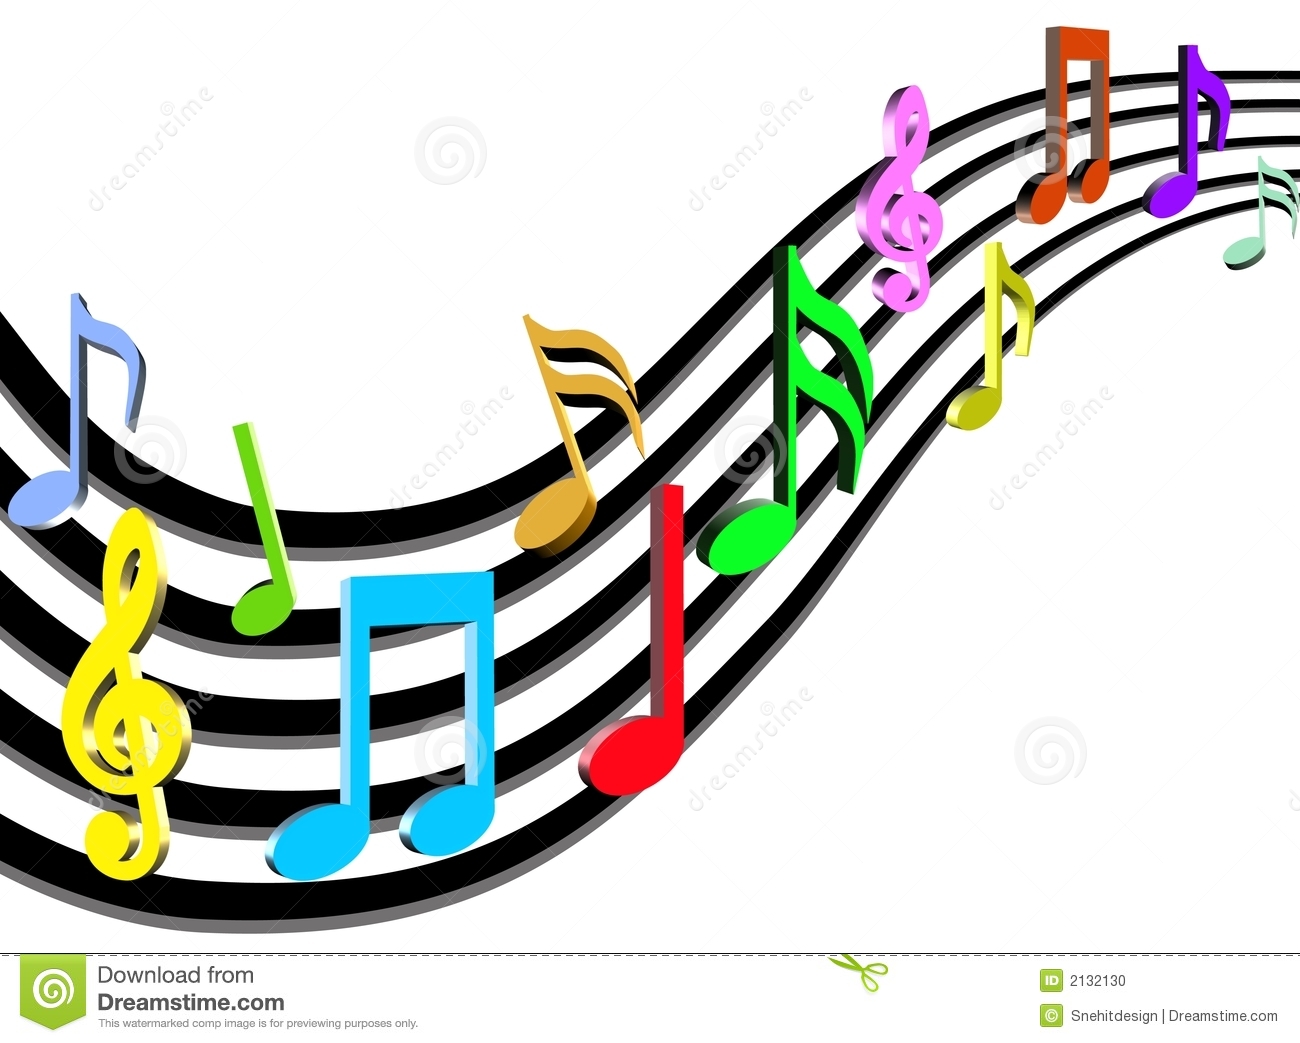 Colorful Music Notes Wallpaper Music Notes 2132130 Jpg